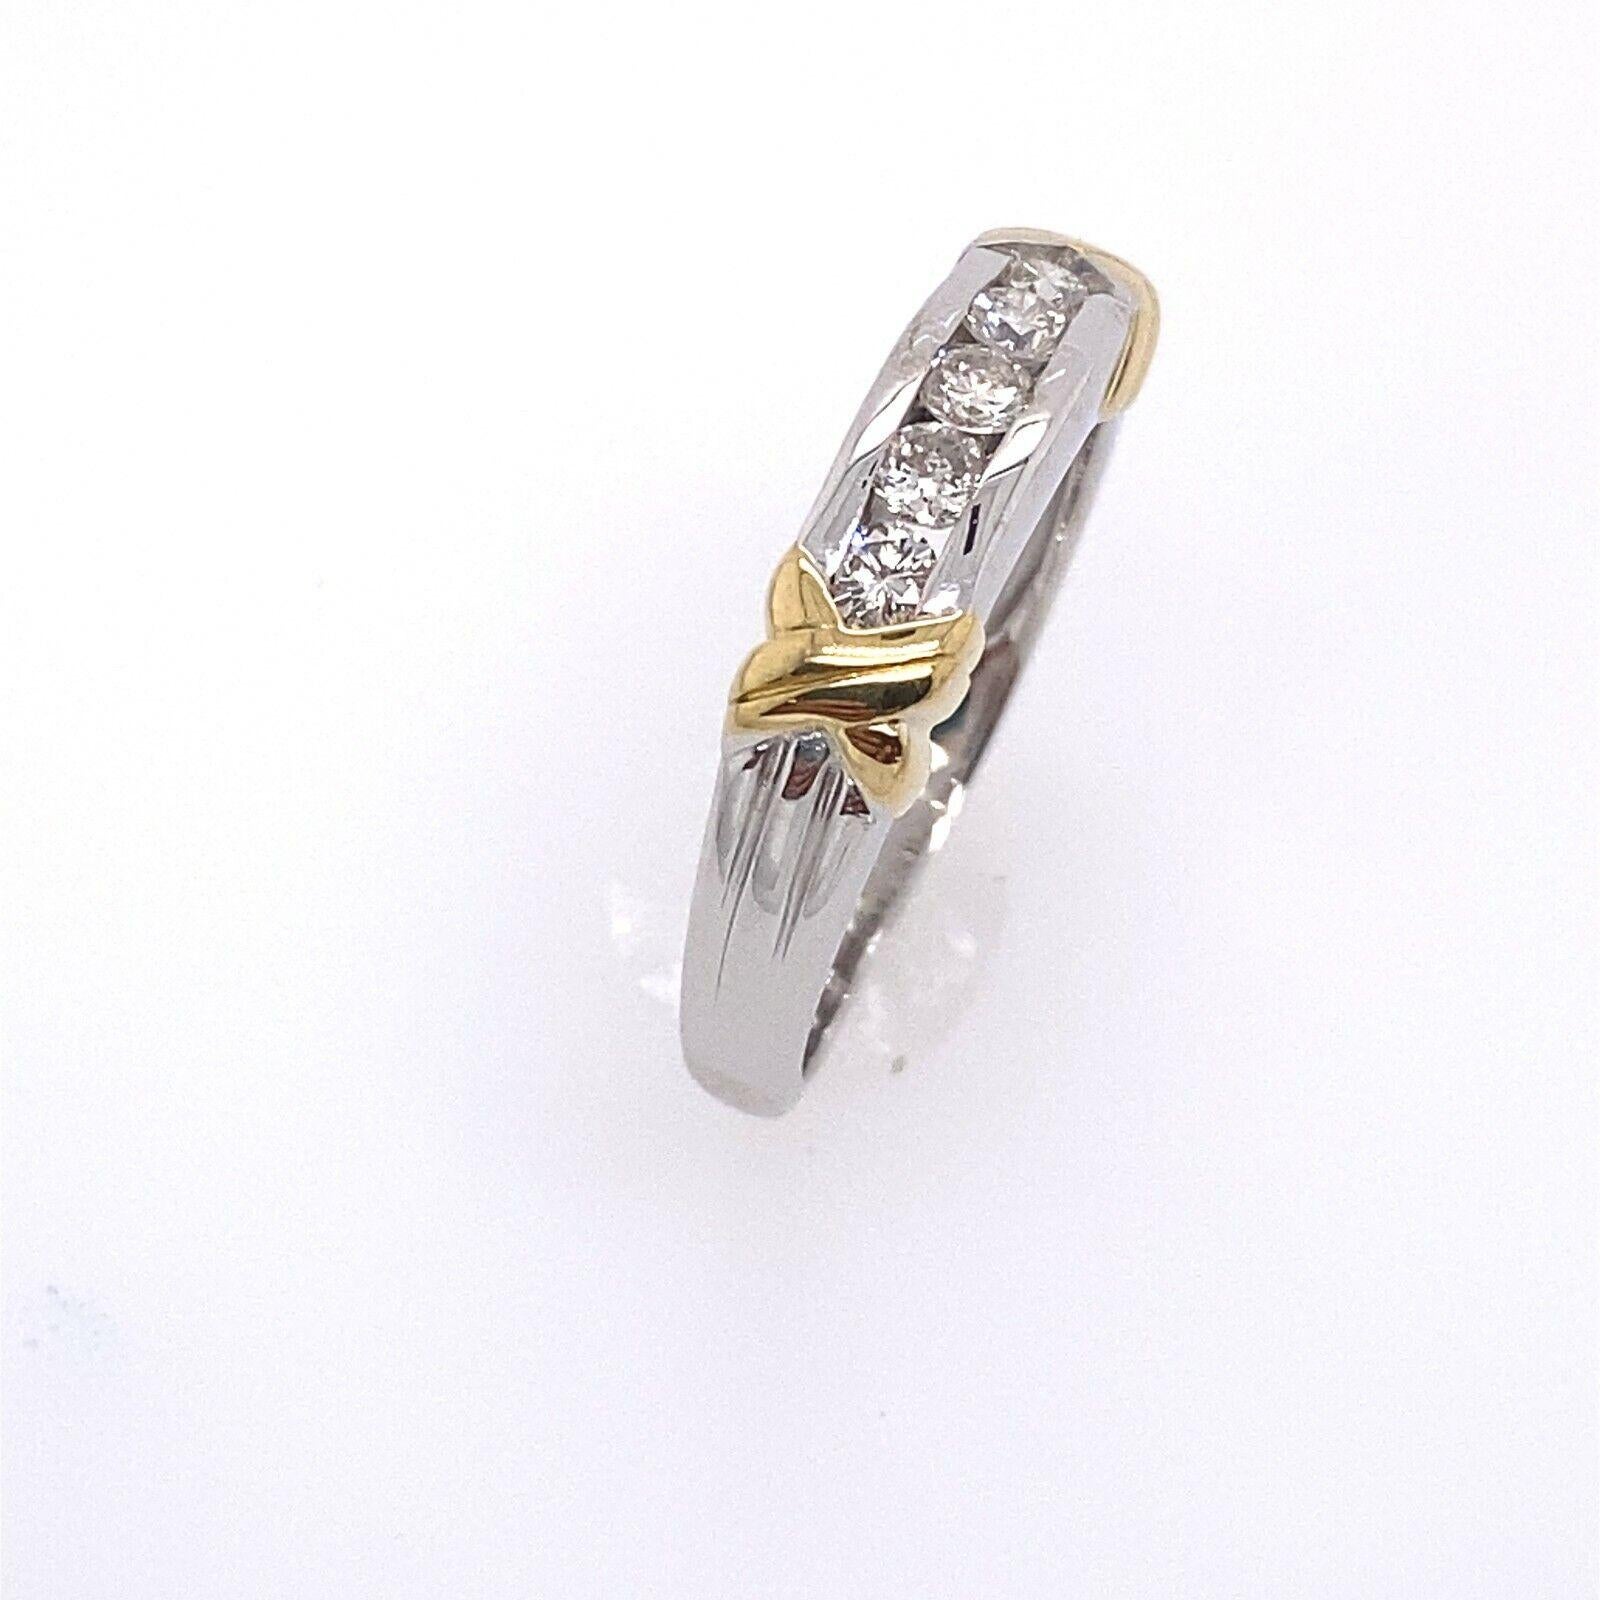 Classic White Gold Diamond Eternity Band, Set With 0.25ct Of Round Diamonds

Not Hallmarked, but tested as 18ct Gold.

Additional Information:
Total Diamond Weight: 0.25ct
Diamond Colour: G/H
Diamond Clarity: SI
Width of Band: 2.38mm
Width of Head: